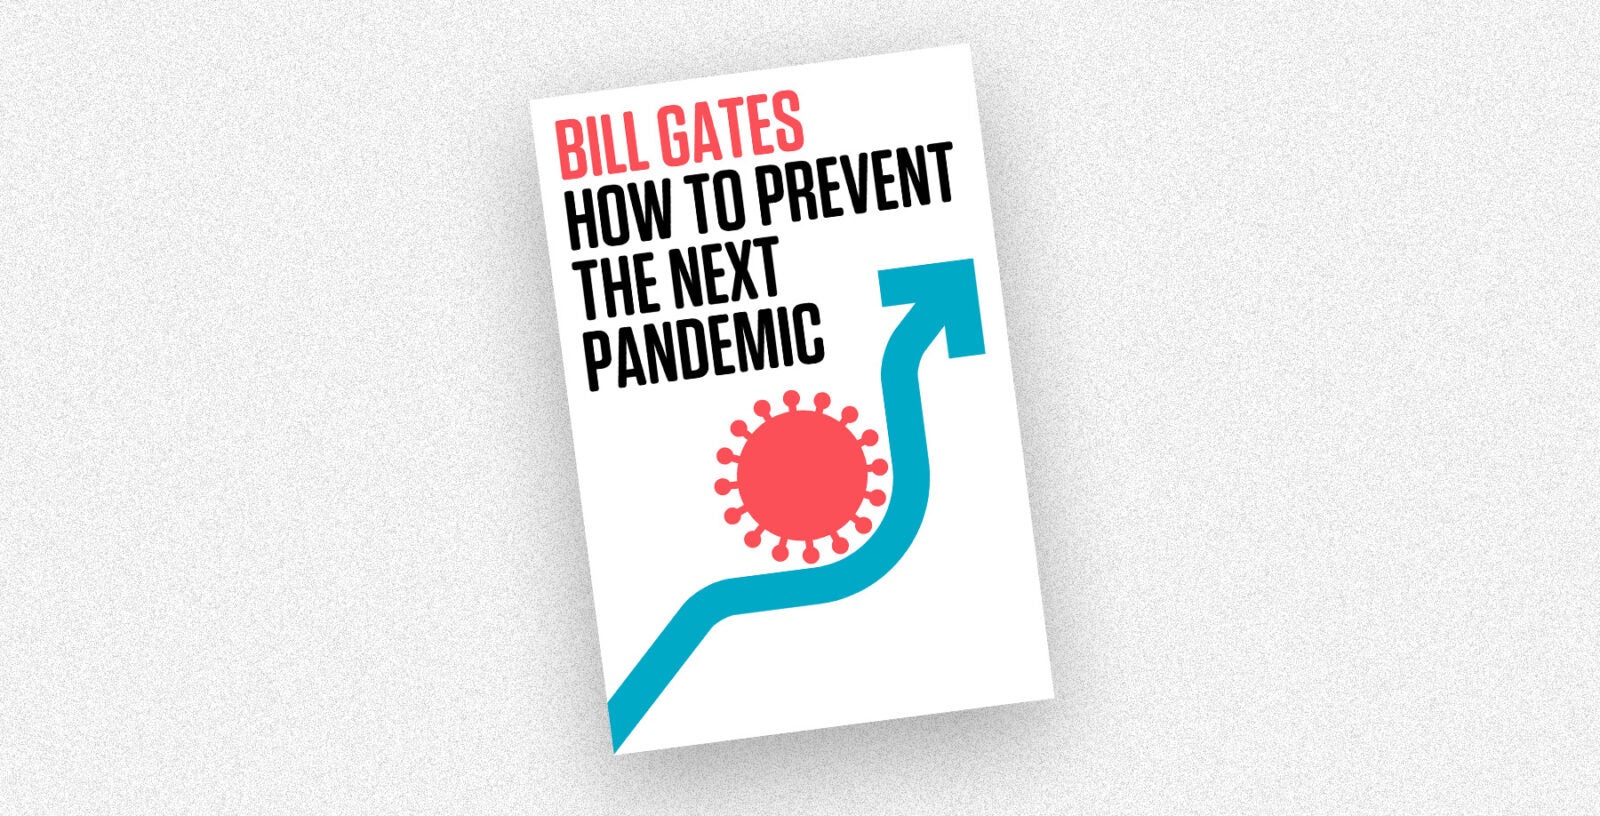 The book cover for "How to Prevent the Next Pandemic" by Bill Gates rests on a white-speckled background.